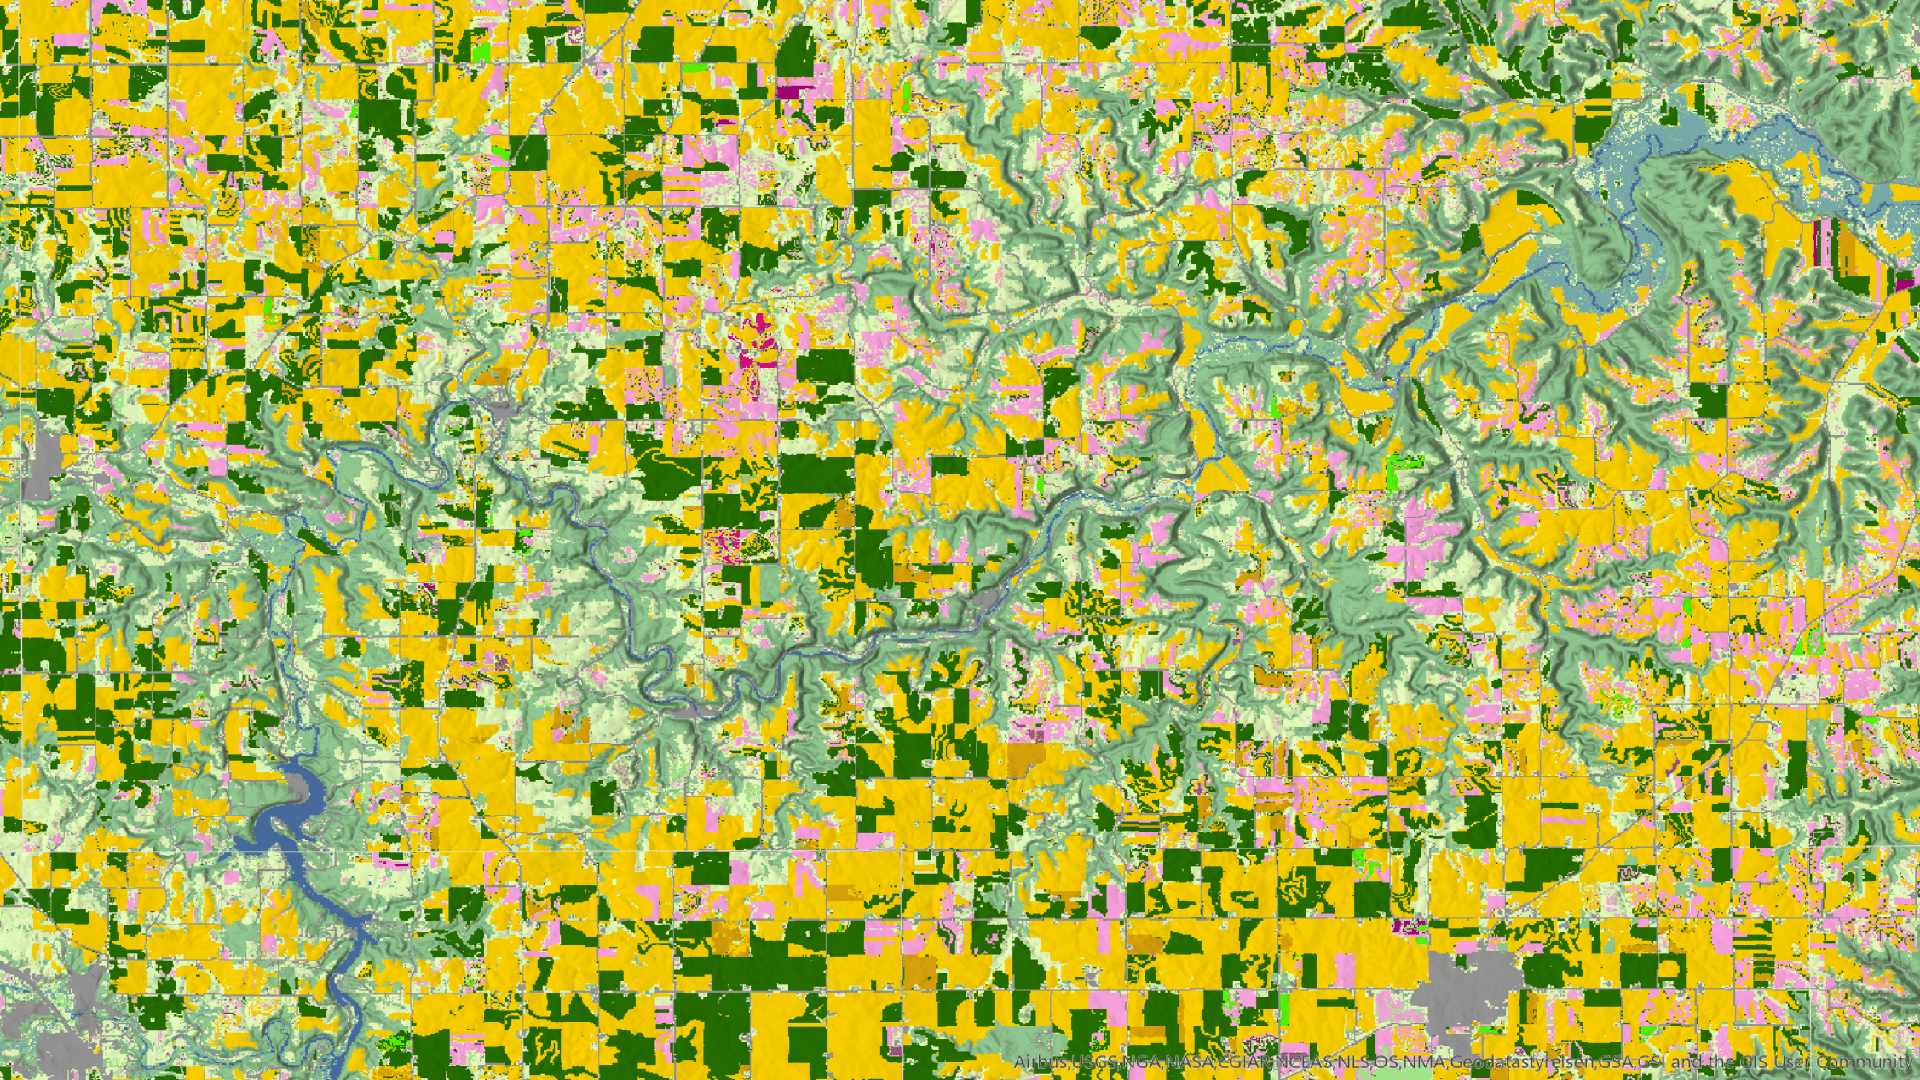 Geographic information system map of agricultural landscape in Minnesota.